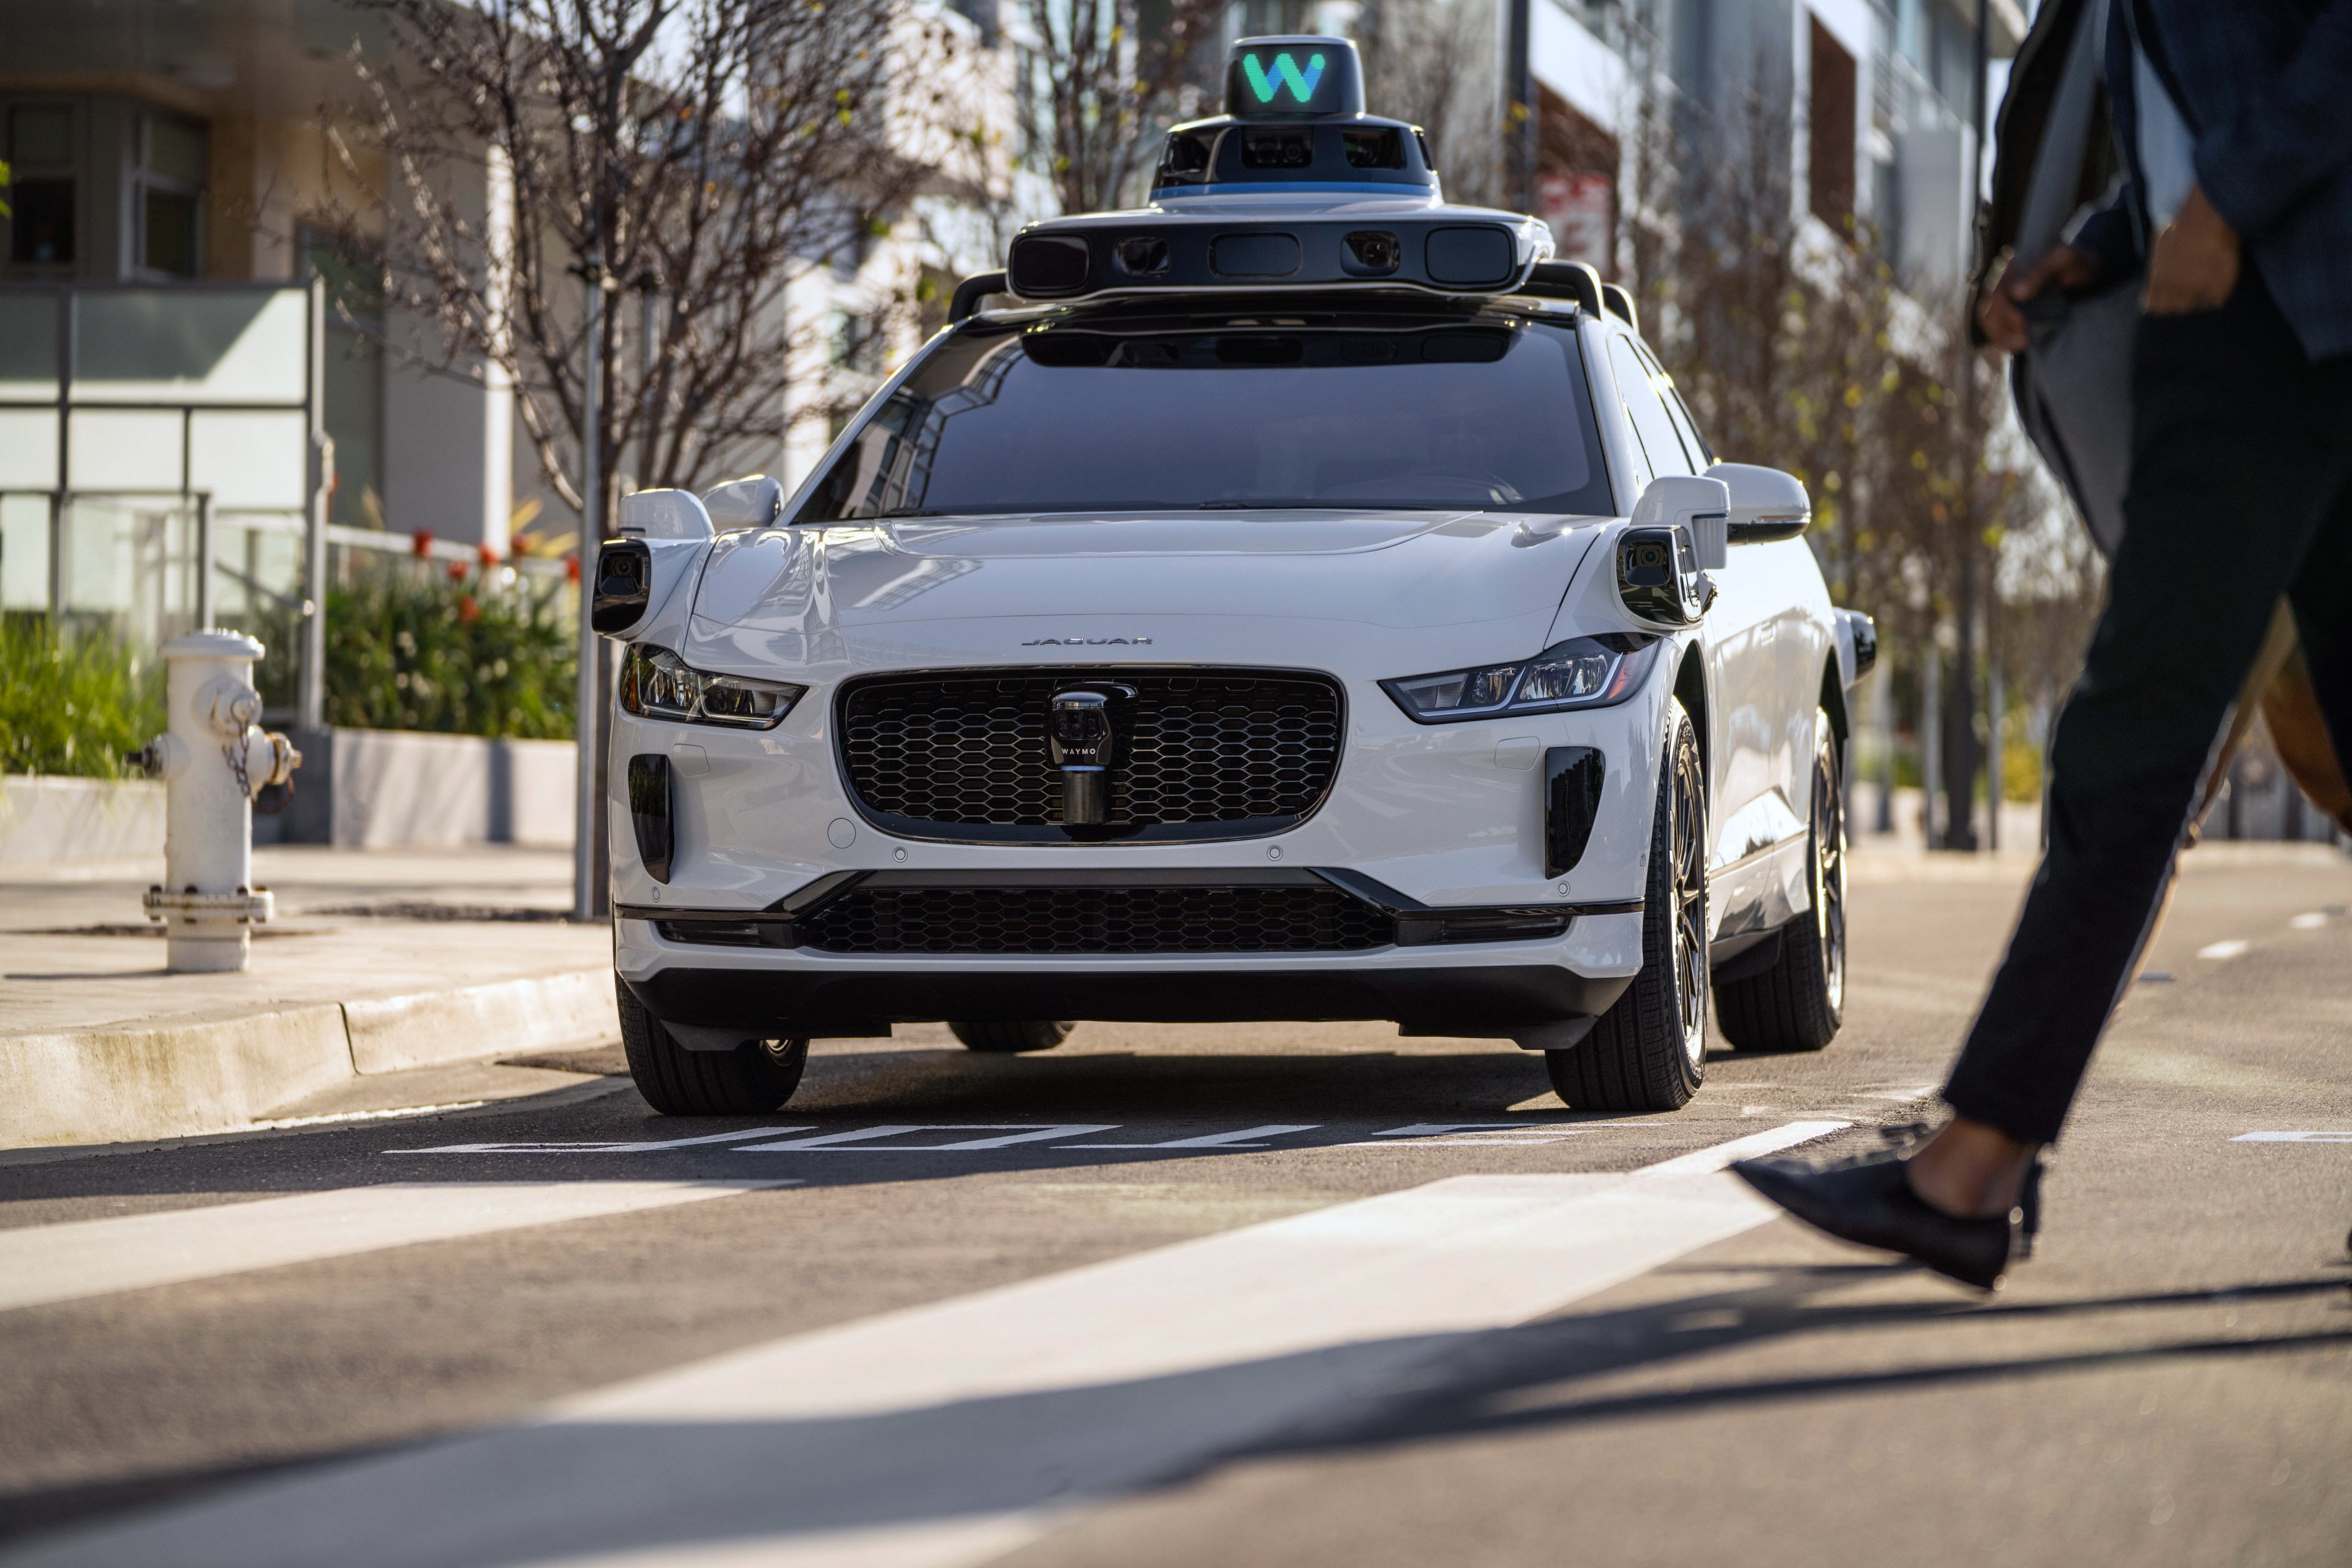 Uber Users Will Be Able To Hail Robotaxis. But Only in Phoenix